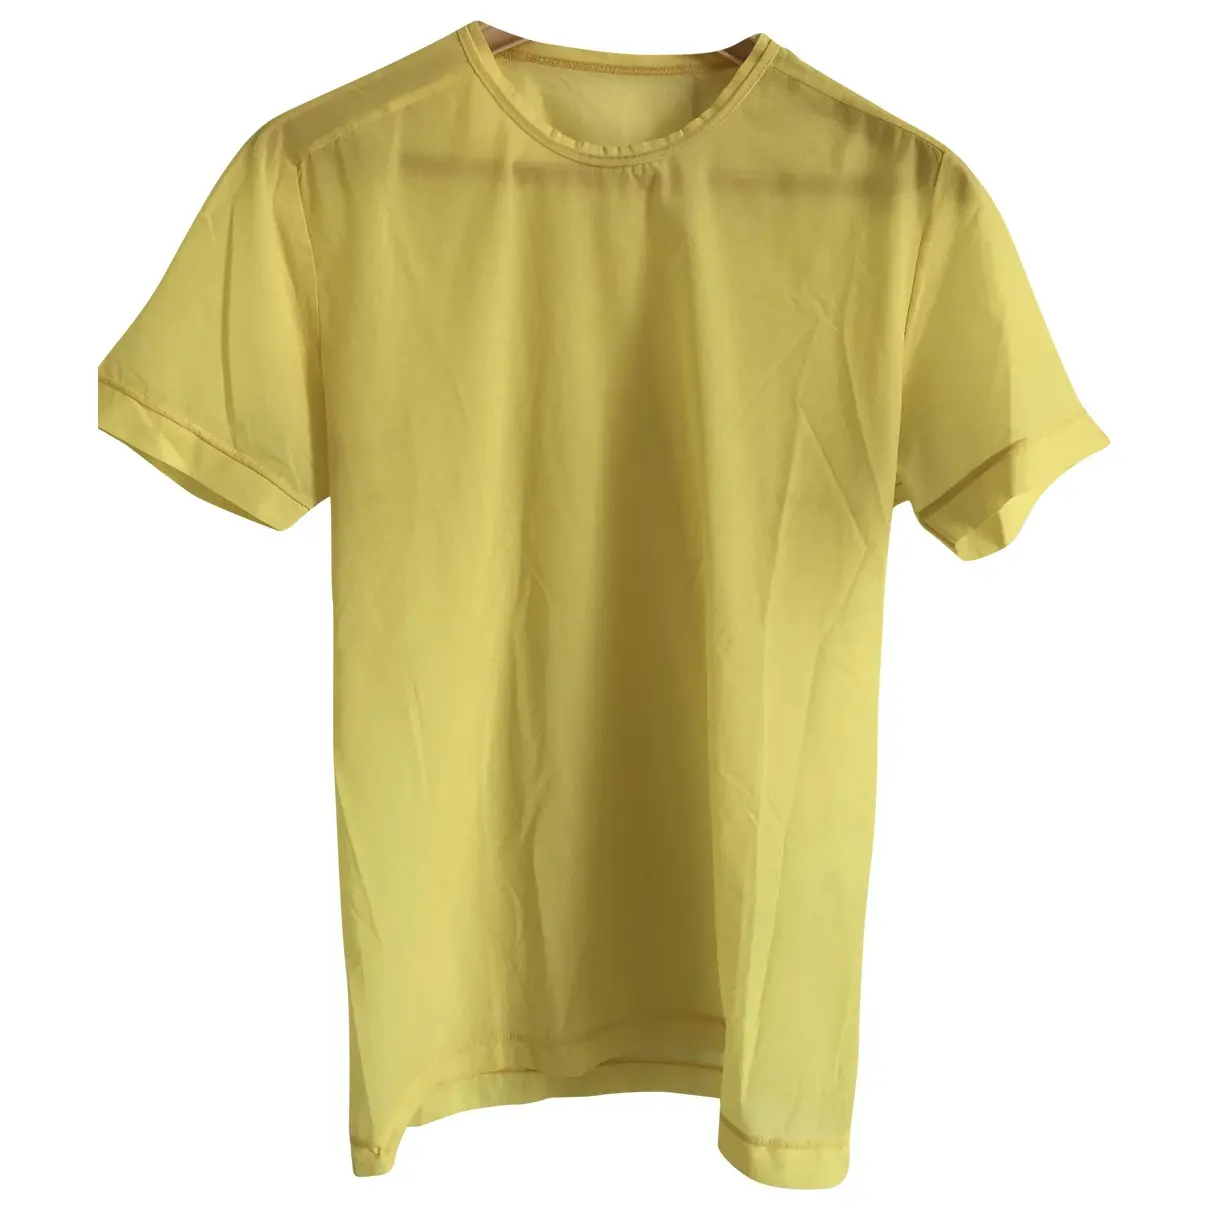 Yellow Polyester T-shirt Carol Christian Poell - Vintage